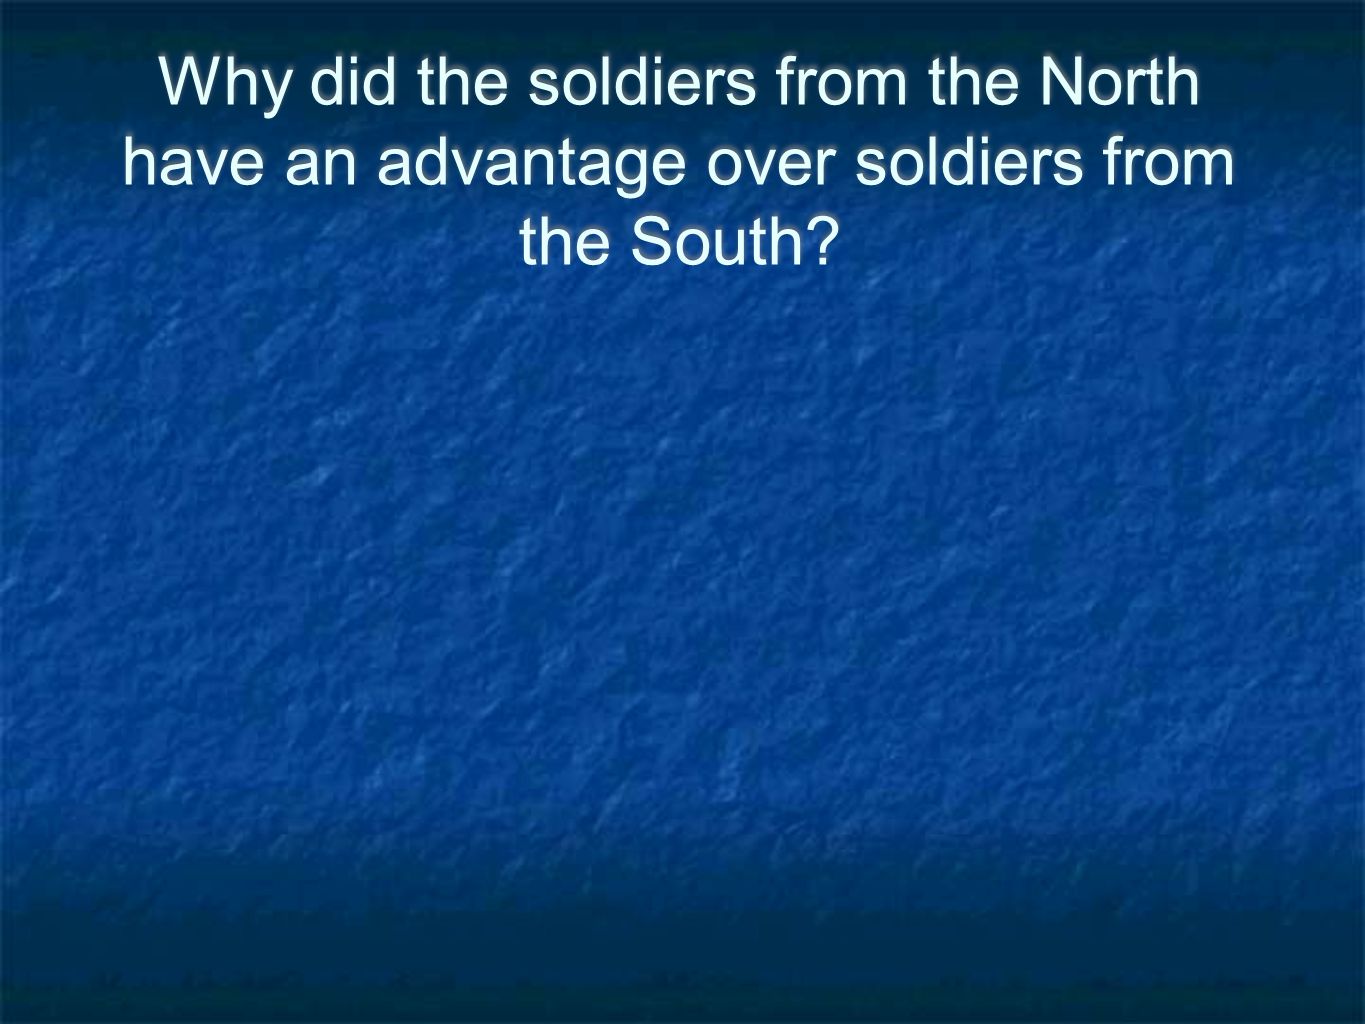 Why did the soldiers from the North have an advantage over soldiers from the South